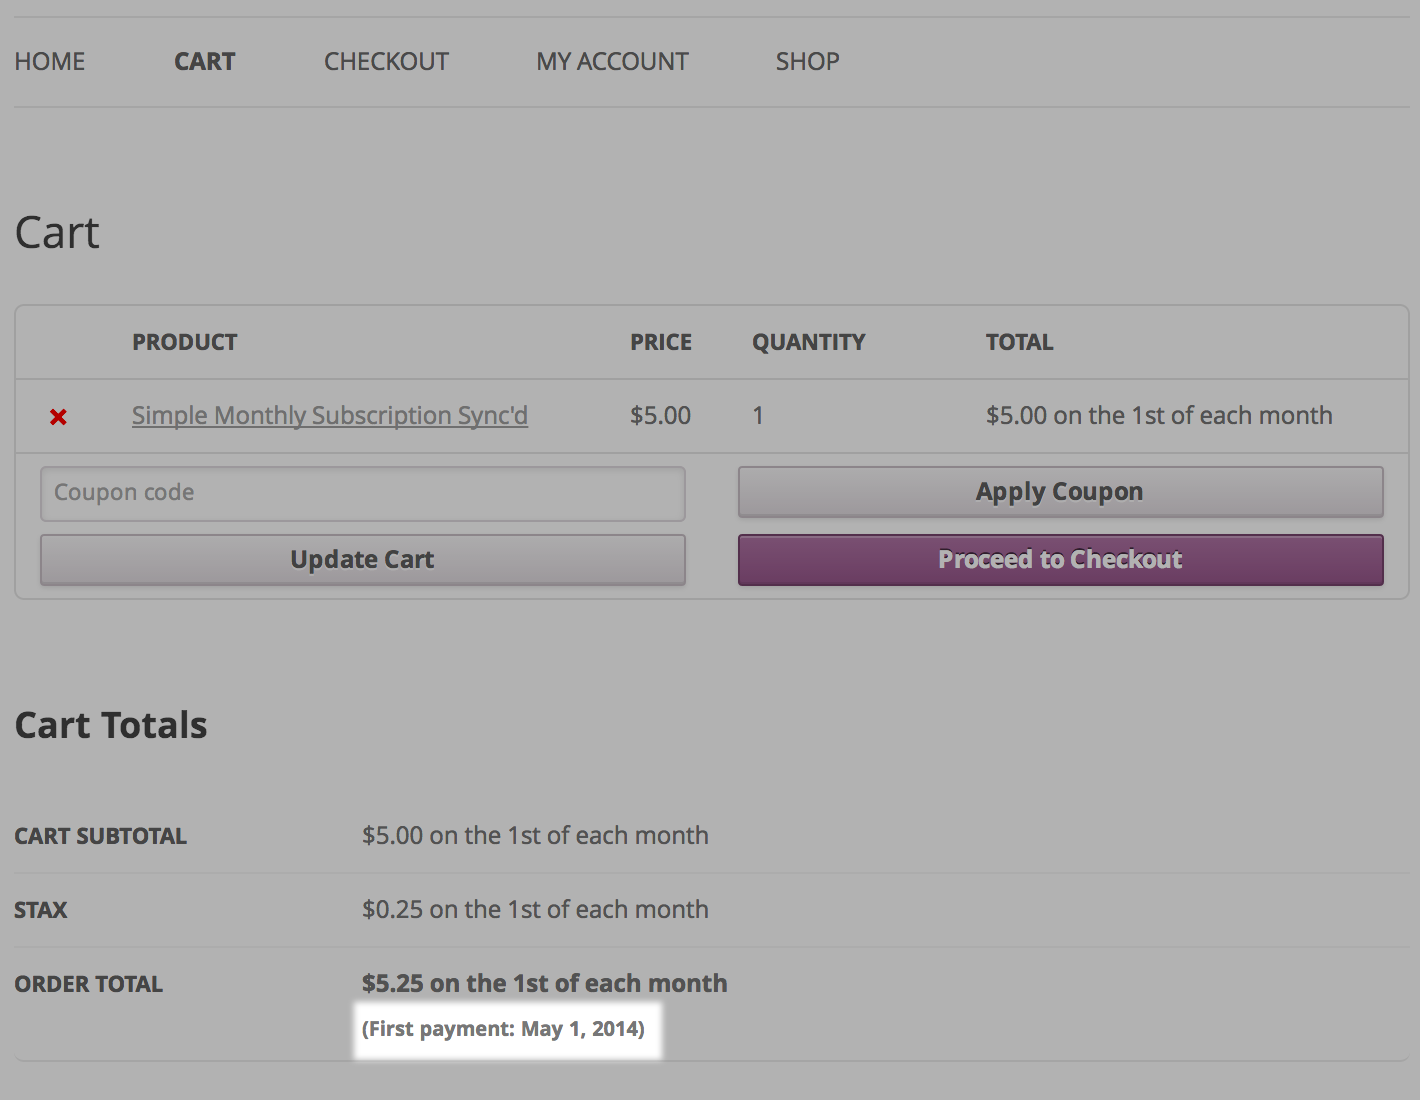 First Payment Date Displayed in Cart